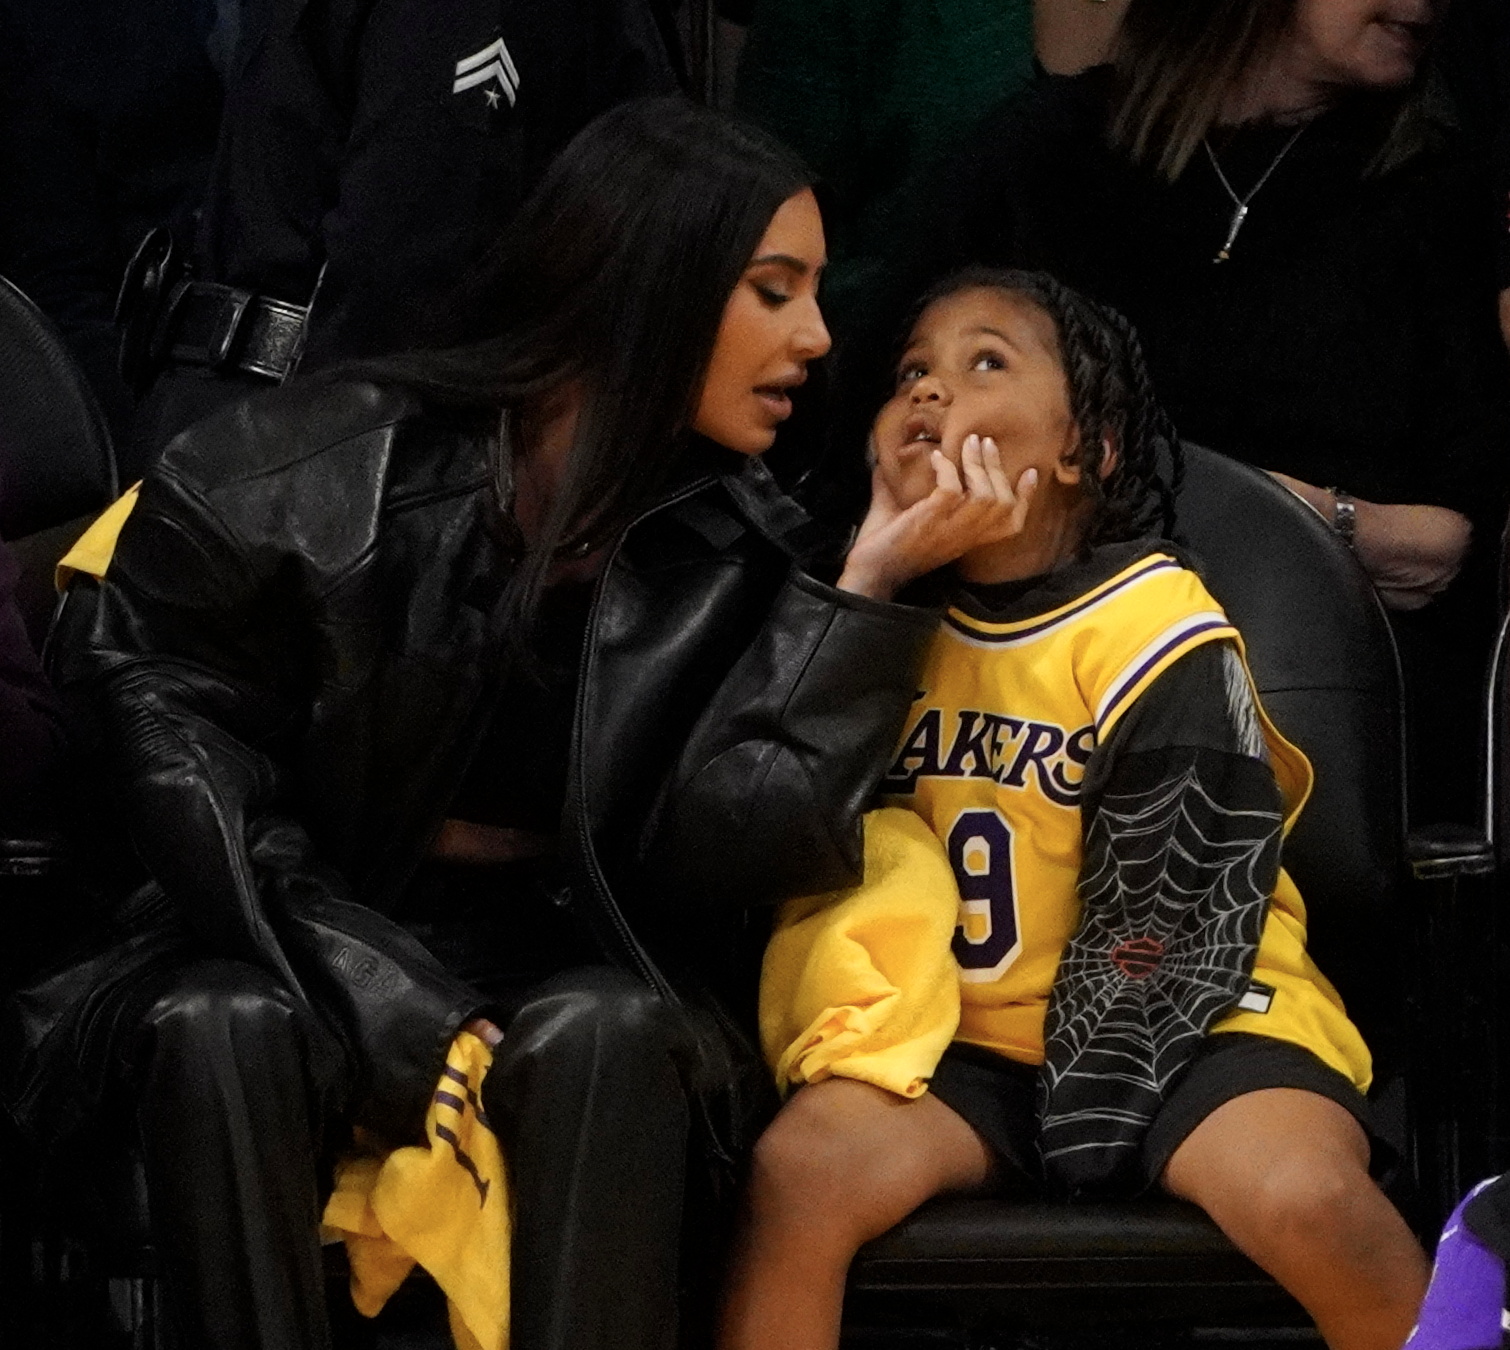 likhoa kim kardashian was spotted dressed stylishly while going to watch the basketball match between the la lakers and memphis grizzlies with her son and mother 652766a6e1ed2 Kim Kardashian Was Spotted Dressed Stylishly While Going To Watch The Basketball Match Between The La Lakers And Memphis Grizzlies With Her Son And Mother.